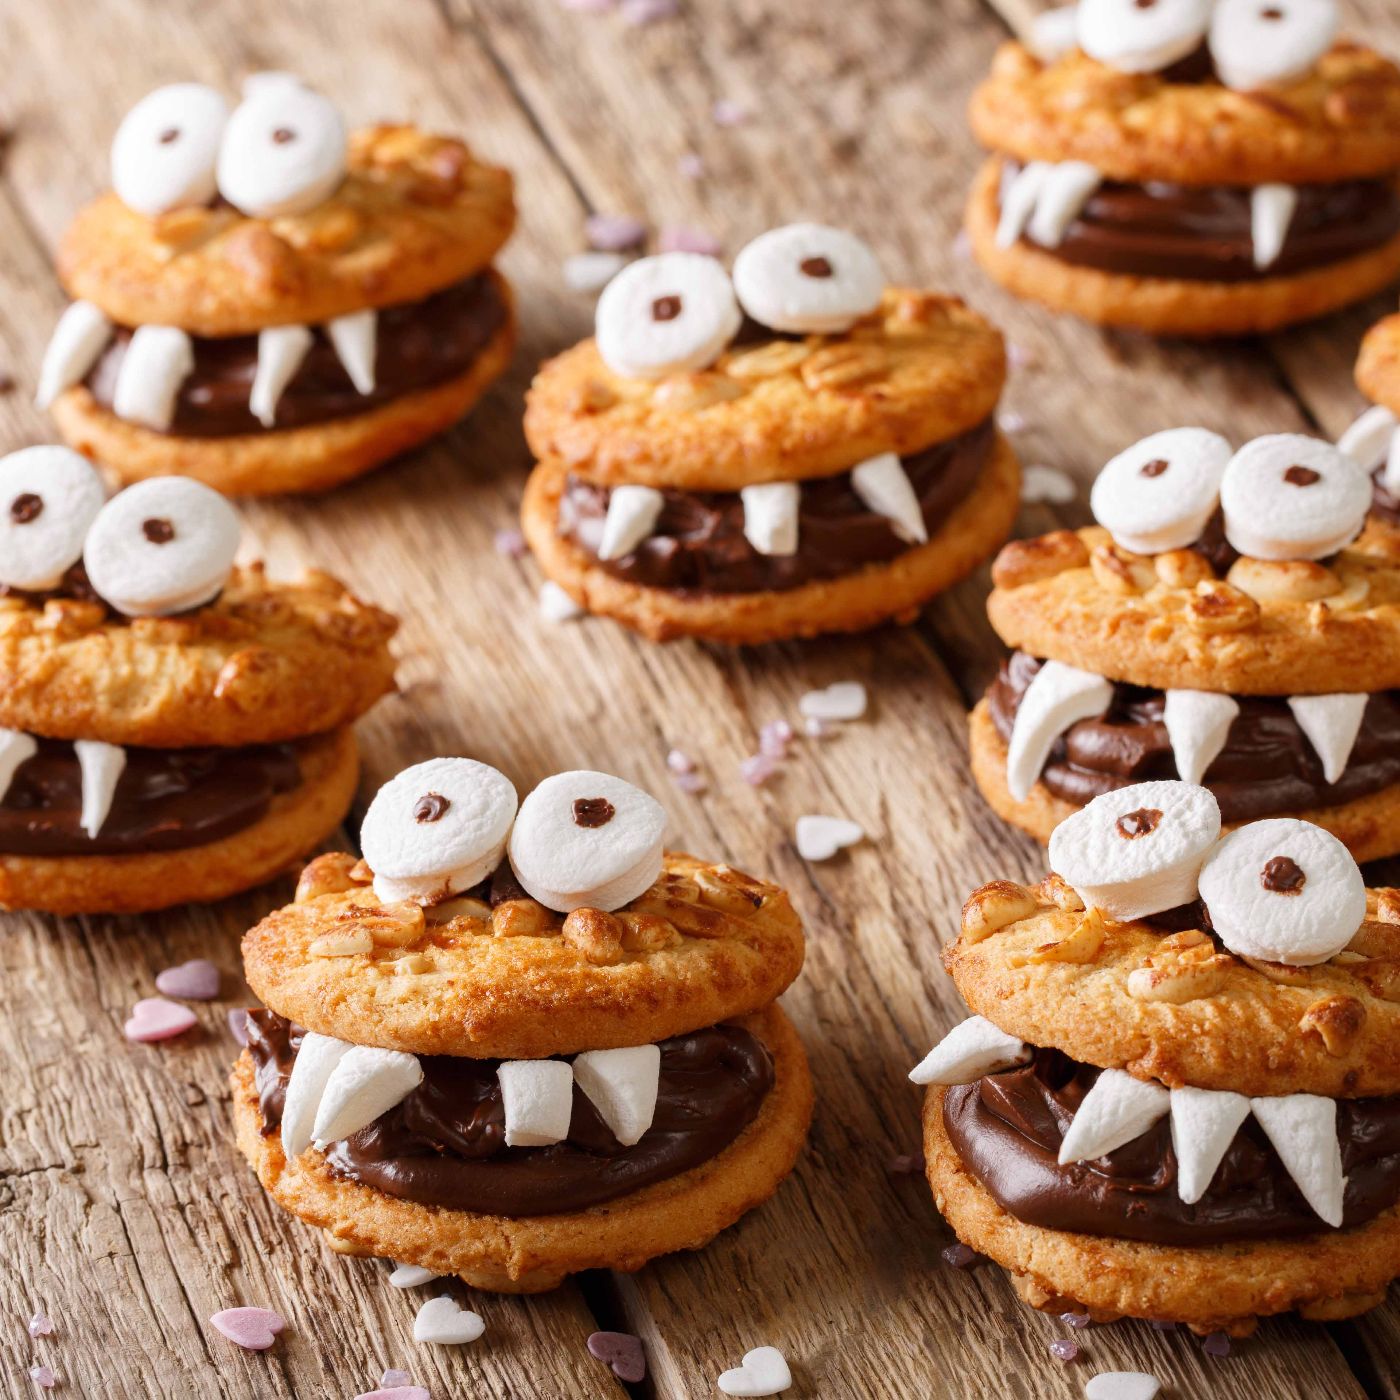 Toothed-monsters-of-cookies-close-up-for-Halloween.-horizontal-1036805500_5760x3840 square.jpg